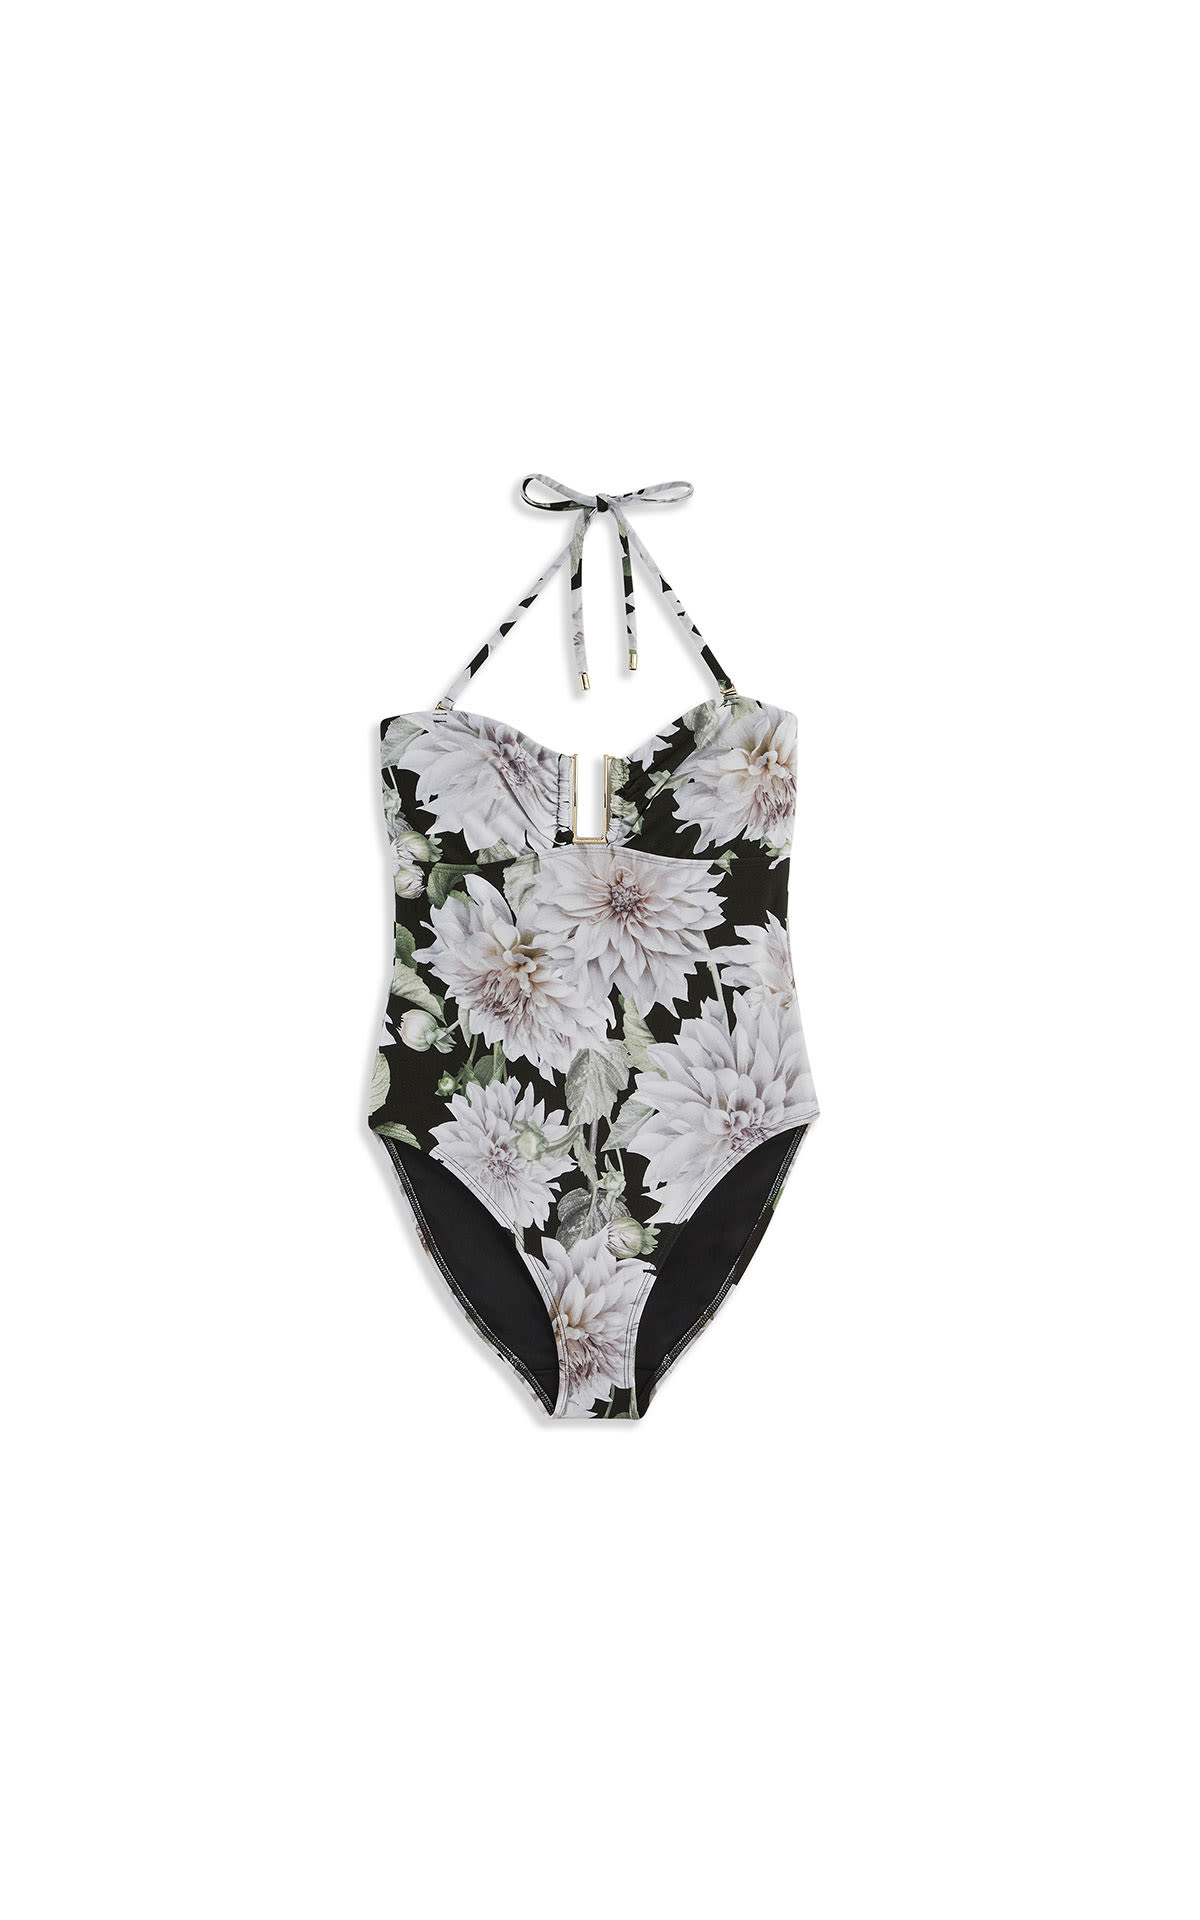 Ted Baker U bra detail swimsuit from Bicester Village